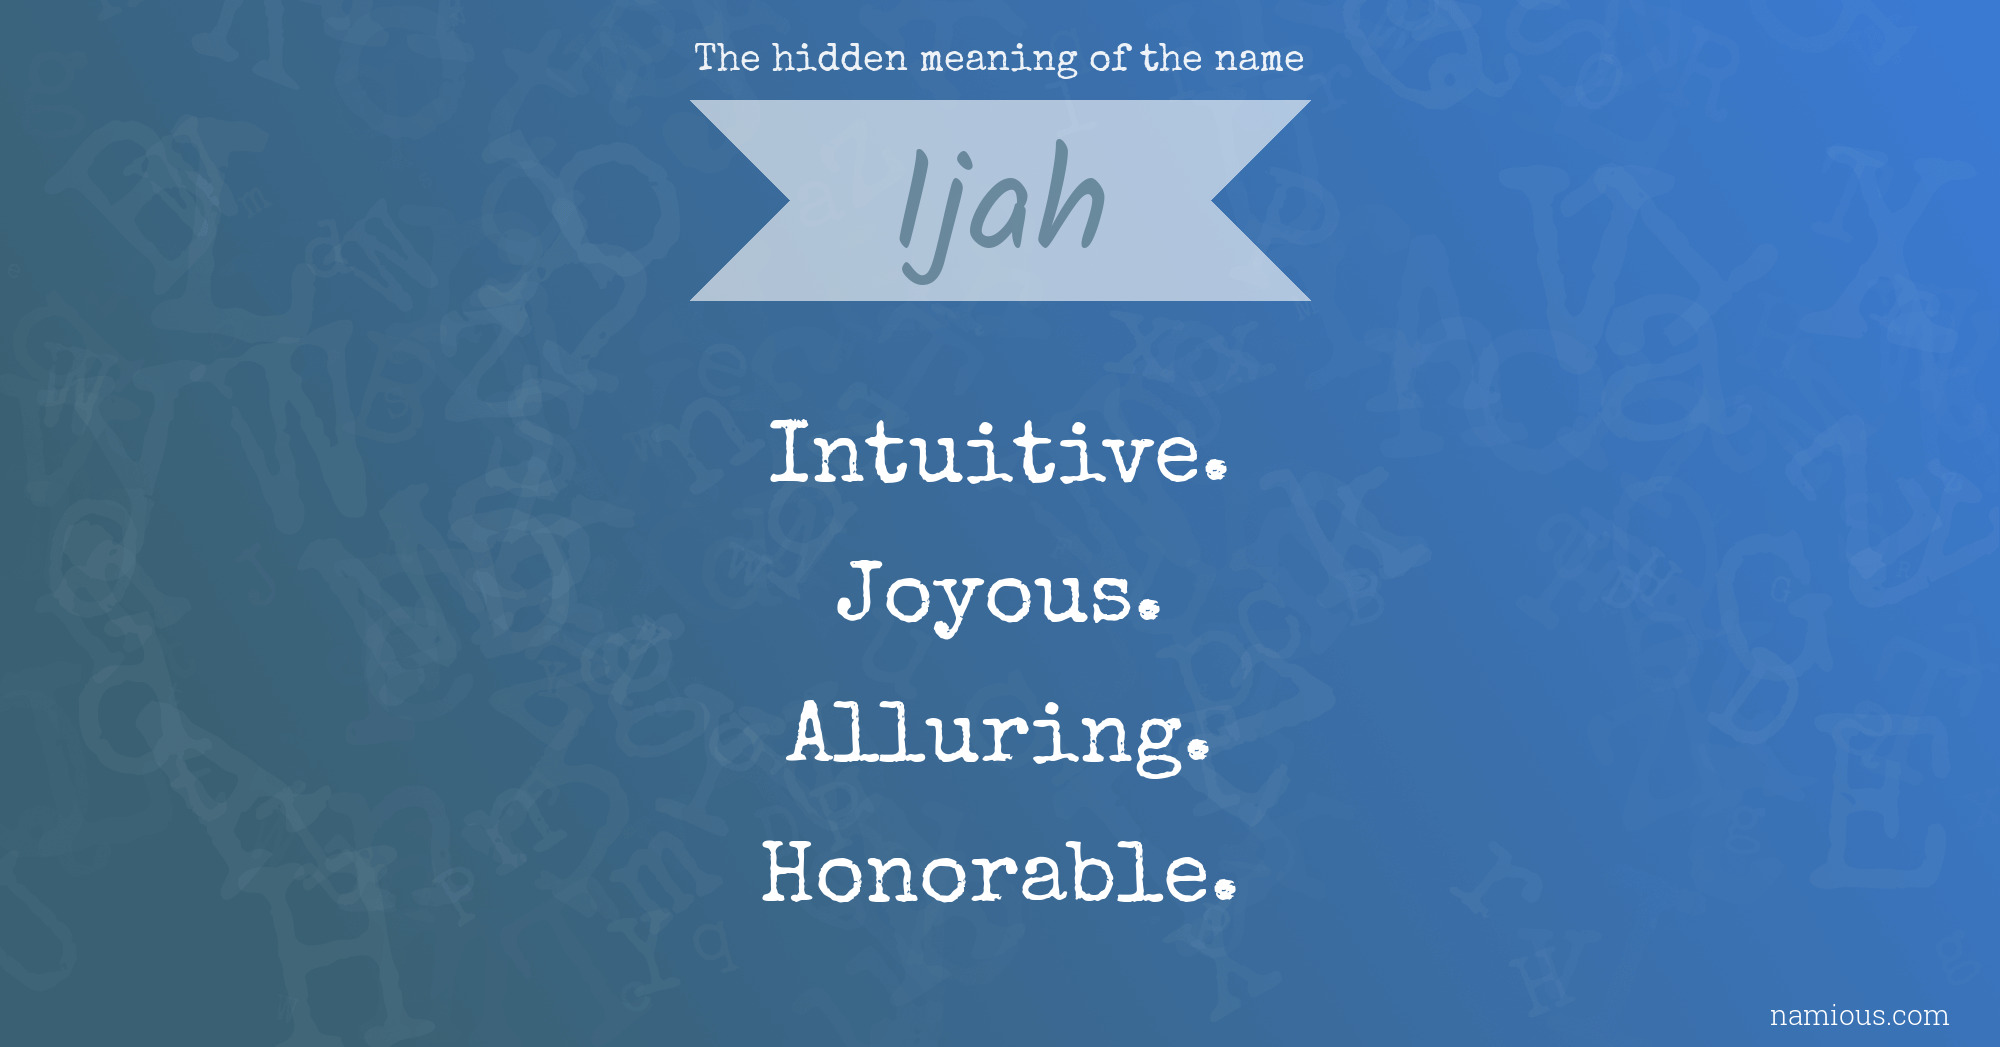 The hidden meaning of the name Ijah